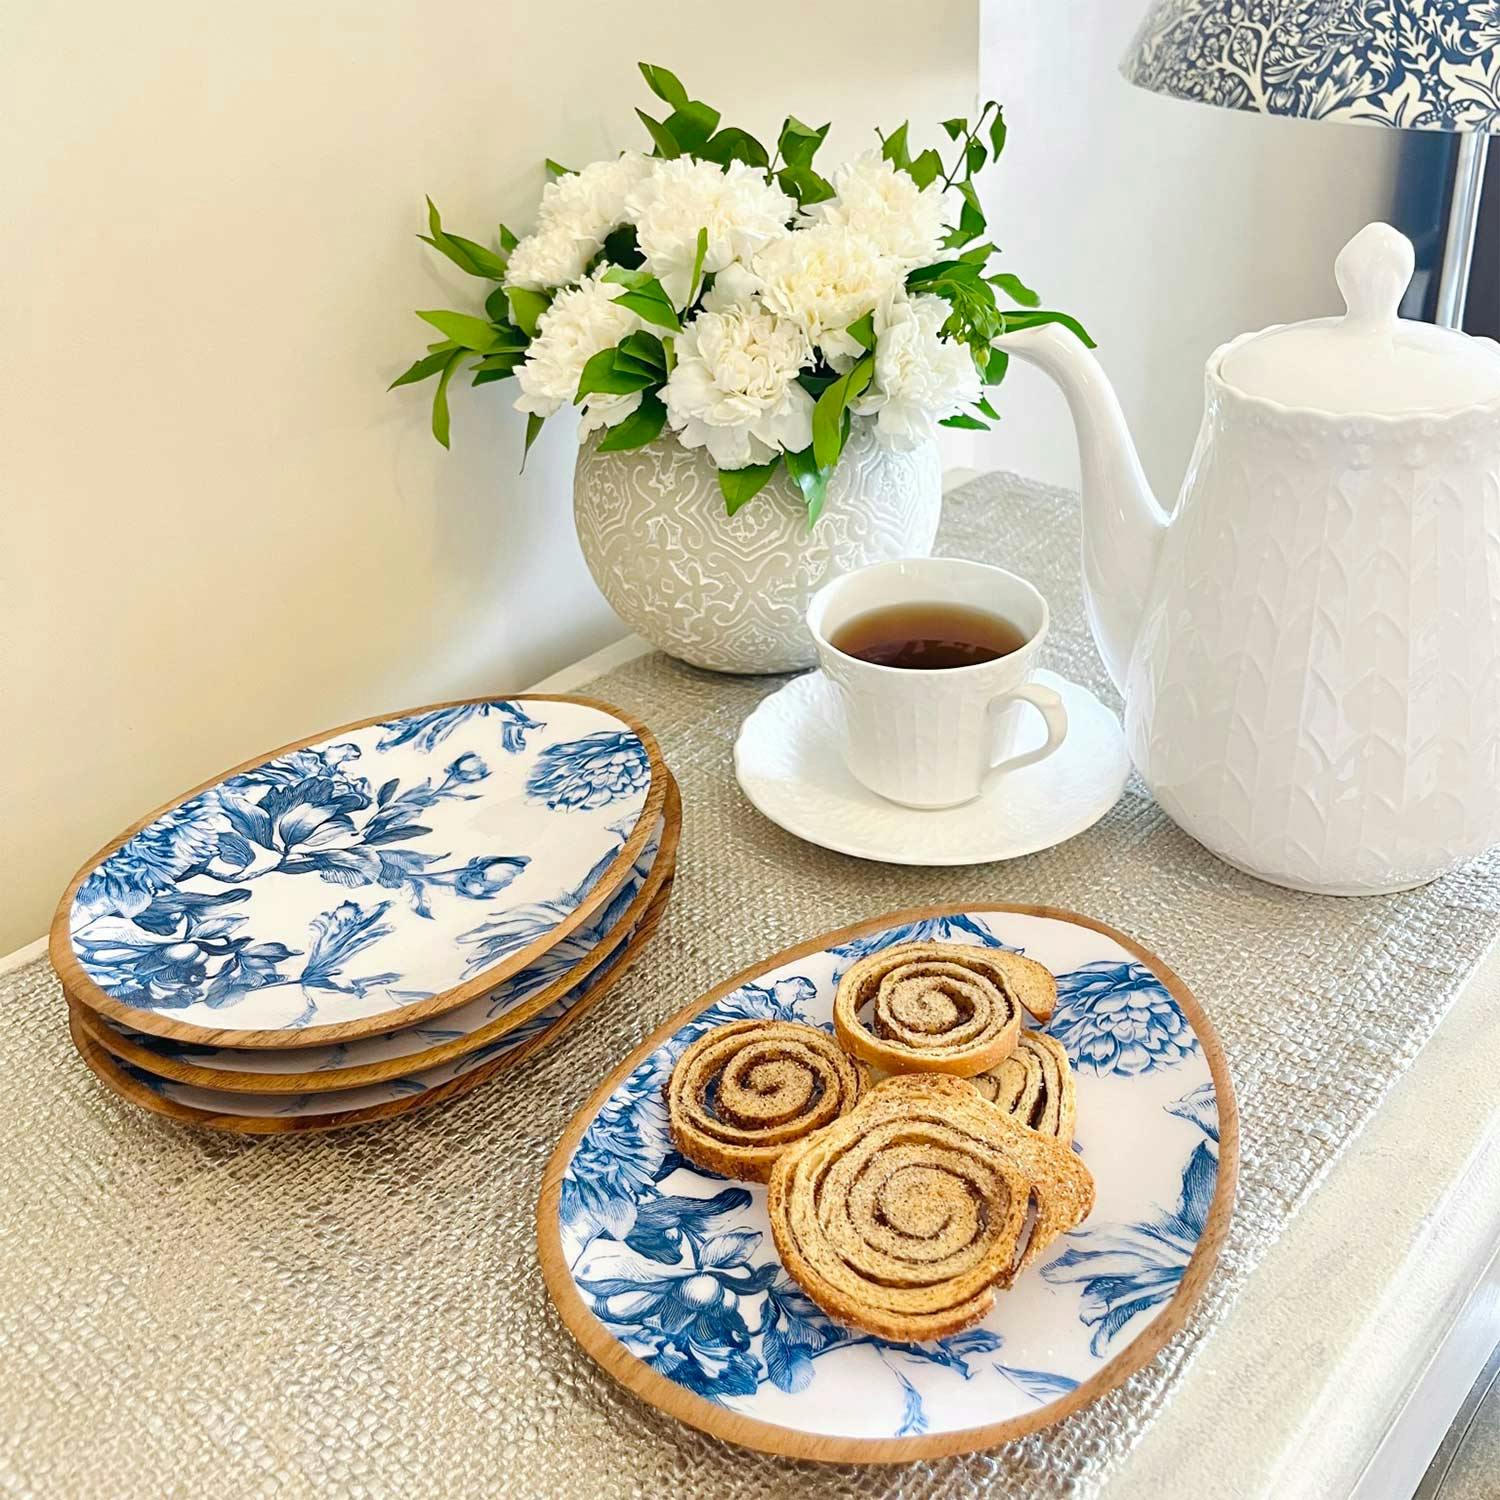 Mini Oval Plates, Set of 4 - Brittany Blanc, a product by Faaya Gifting